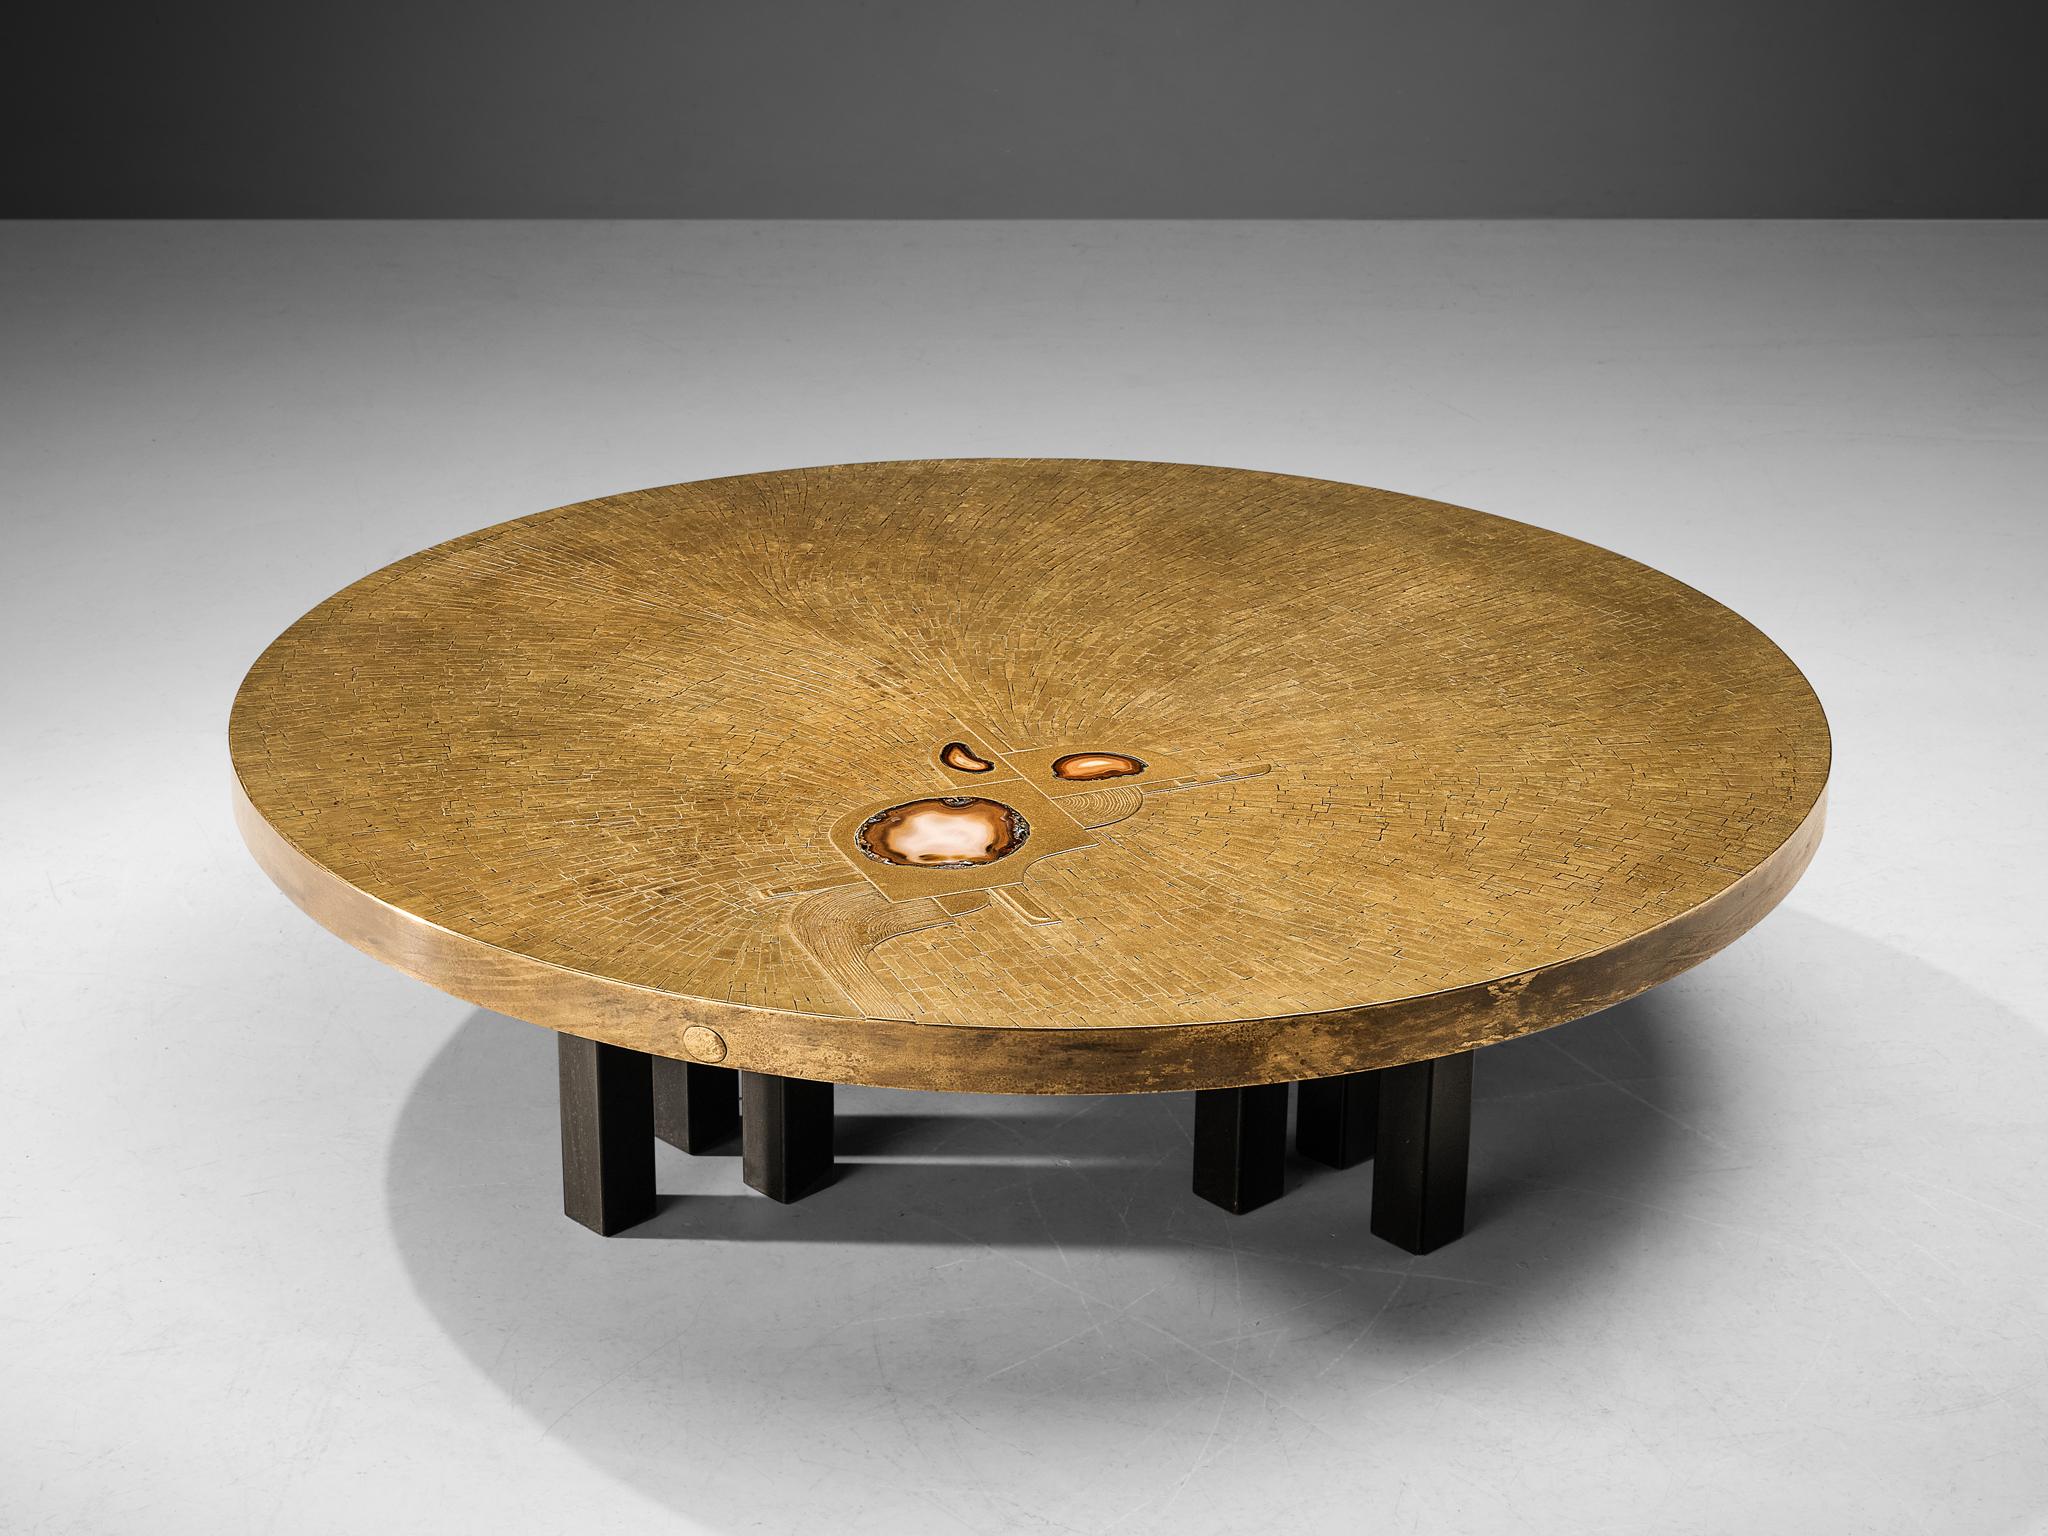 Jean Claude Dresse, coffee table, brass, steel, Brazilian agate, Belgium, circa. 1970

A luxurious custom-made round cocktail table, crafted with high attention for detail which is characteristic for the work of the Belgian artist Jean Claude